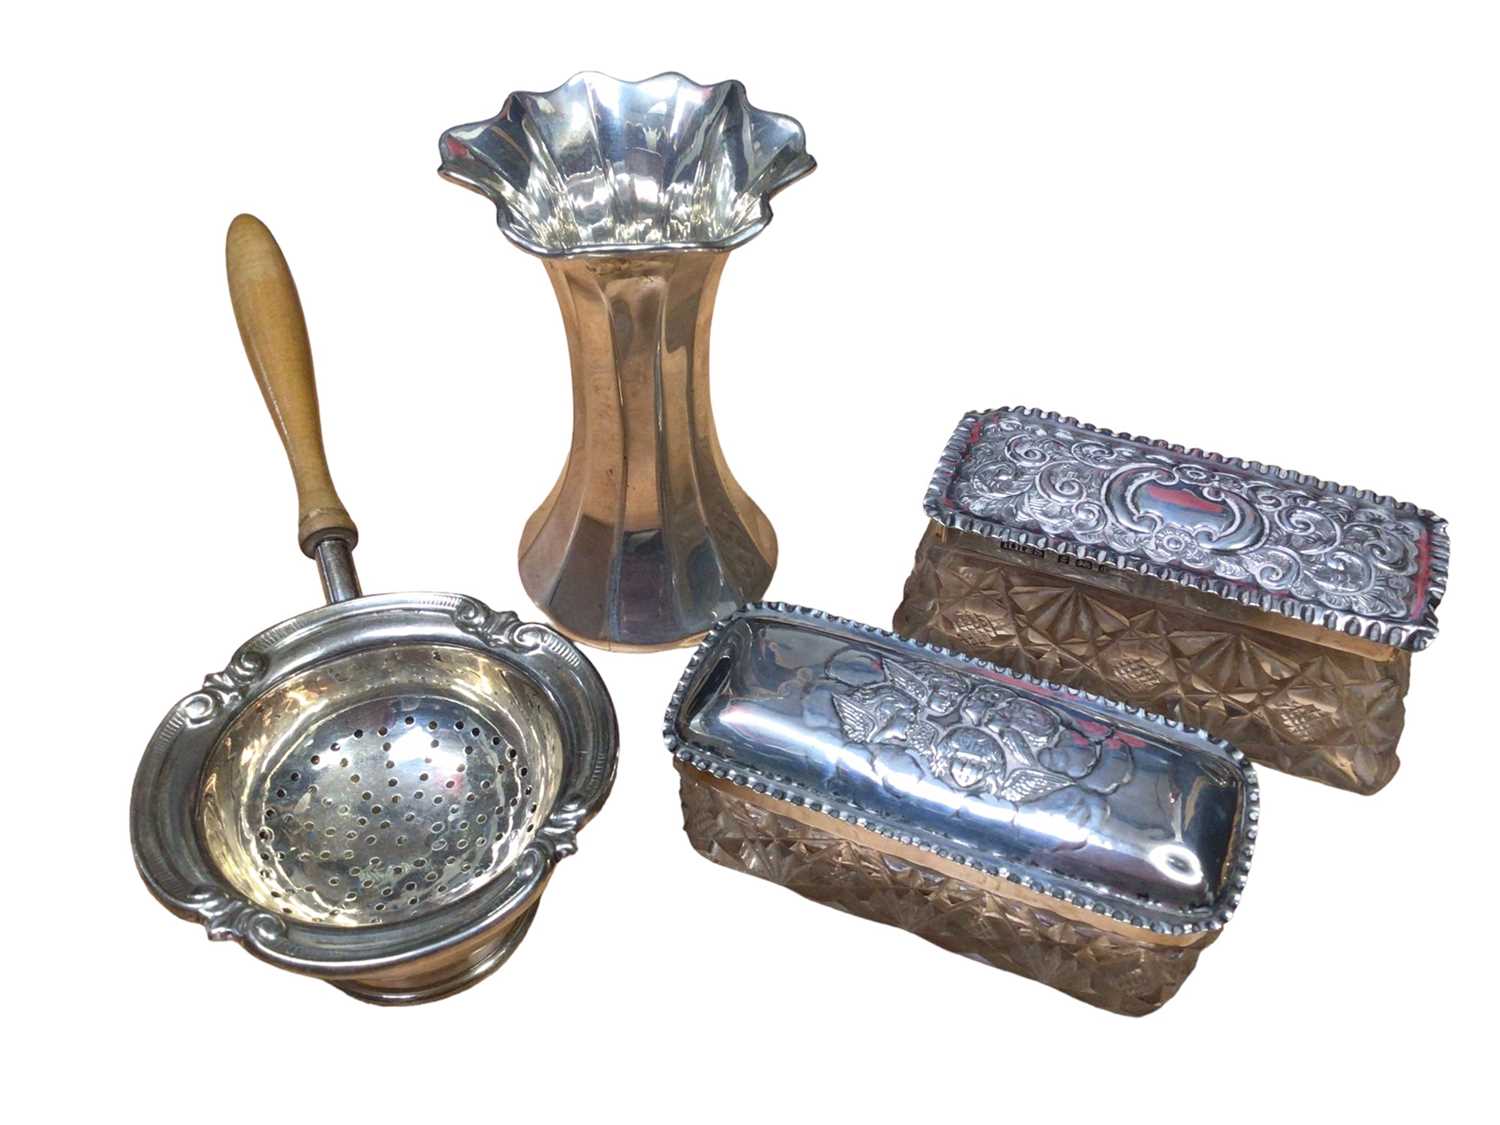 Lot 166 - 1960s silver tea strainer with turned wood handle and silver stand, silver trumpet vase and two silver topped glass vanity jars